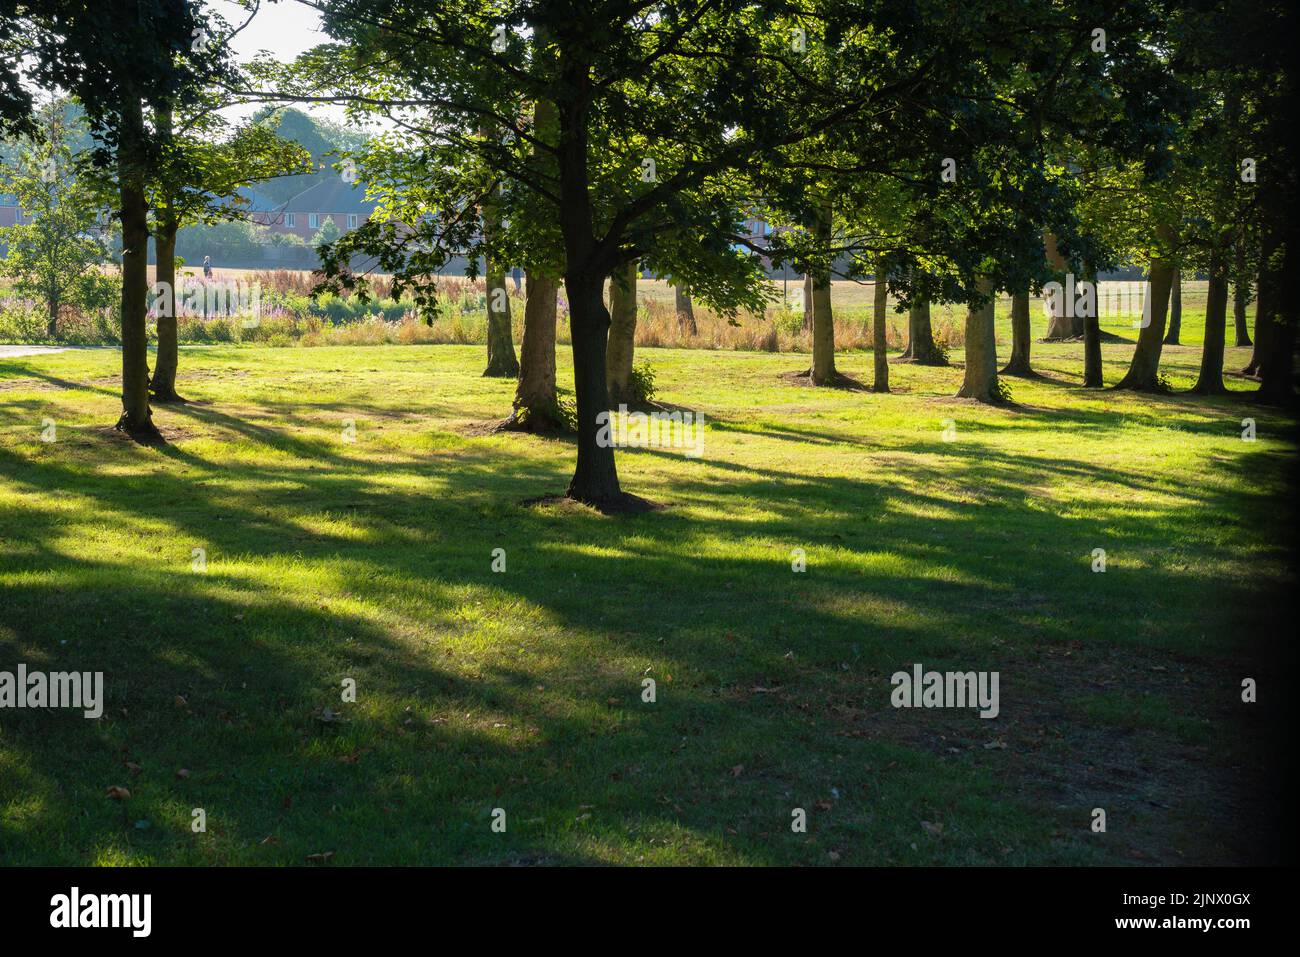 Parklands, picnic area, shaded trees, protection from sun, grass areas, long shadows, idyllic setting, summer, next to lake, distant pedestrian, sun Stock Photo